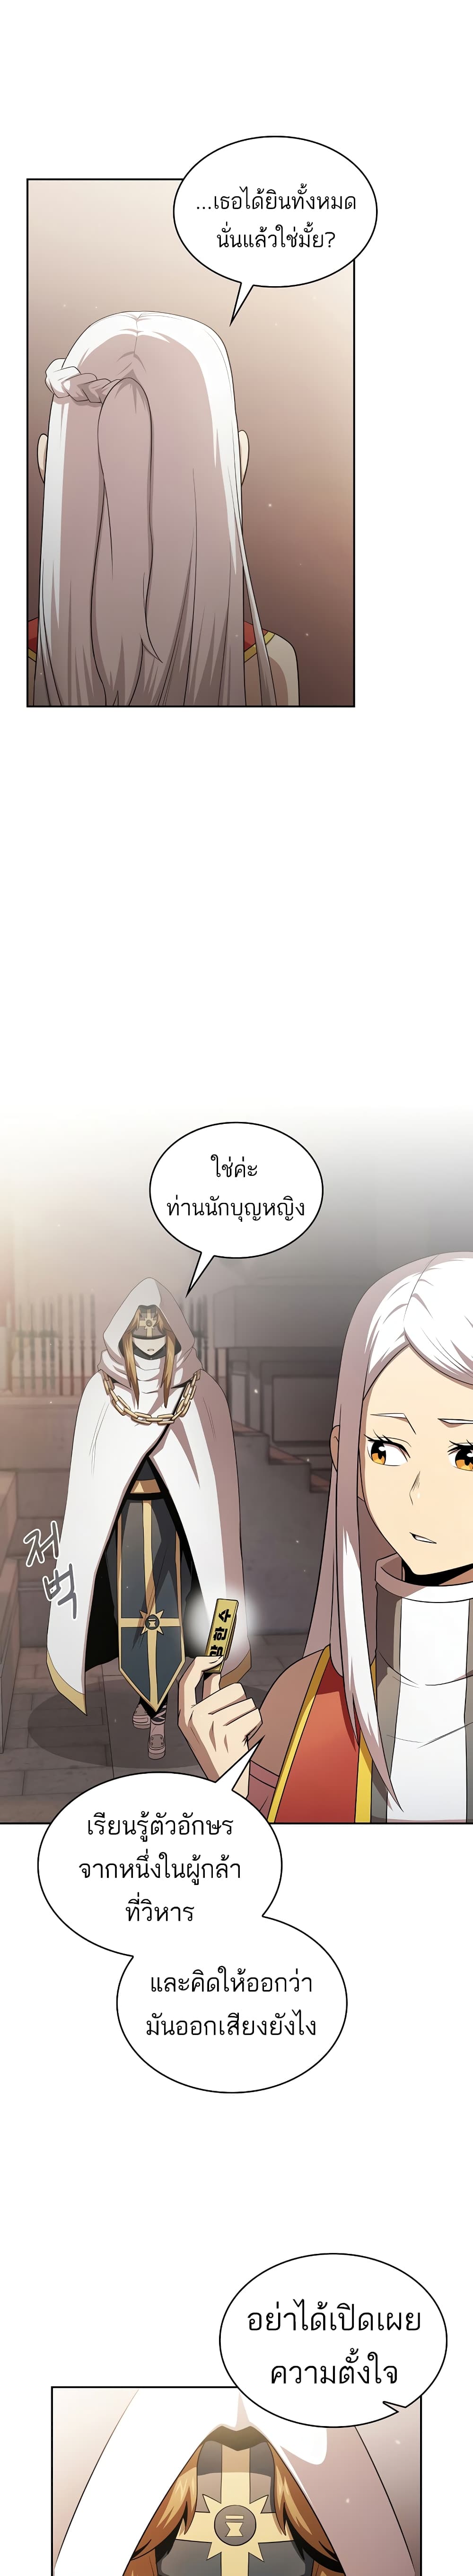 Is This Hero for Real à¸à¸­à¸à¸à¸µà¹ 33 (7)